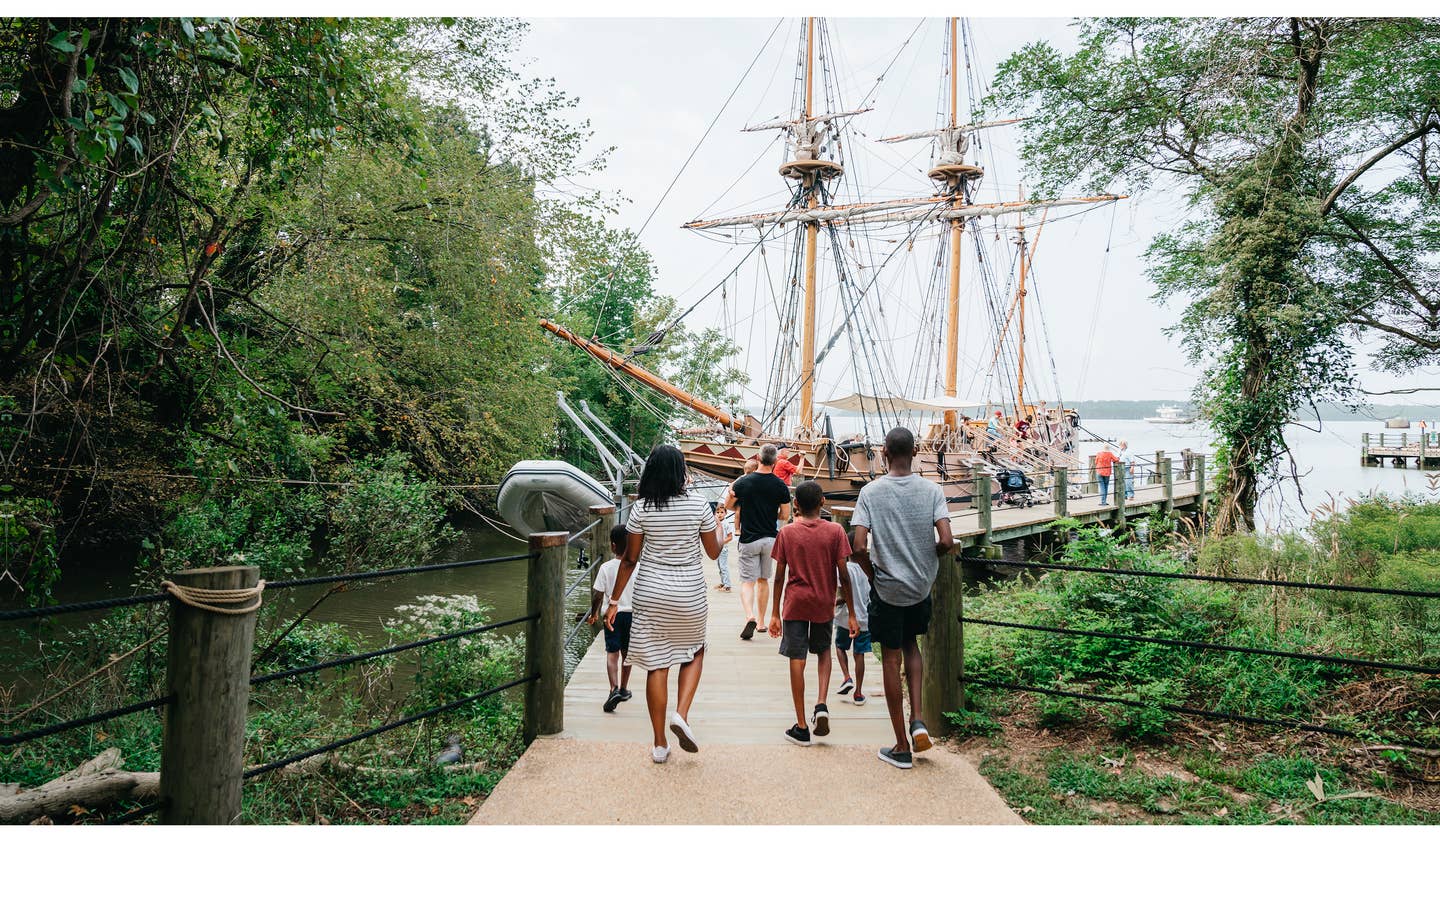 A family walks towards the Susan Constant ship at Jamestown Settlement in Williamsburg, Virginia.